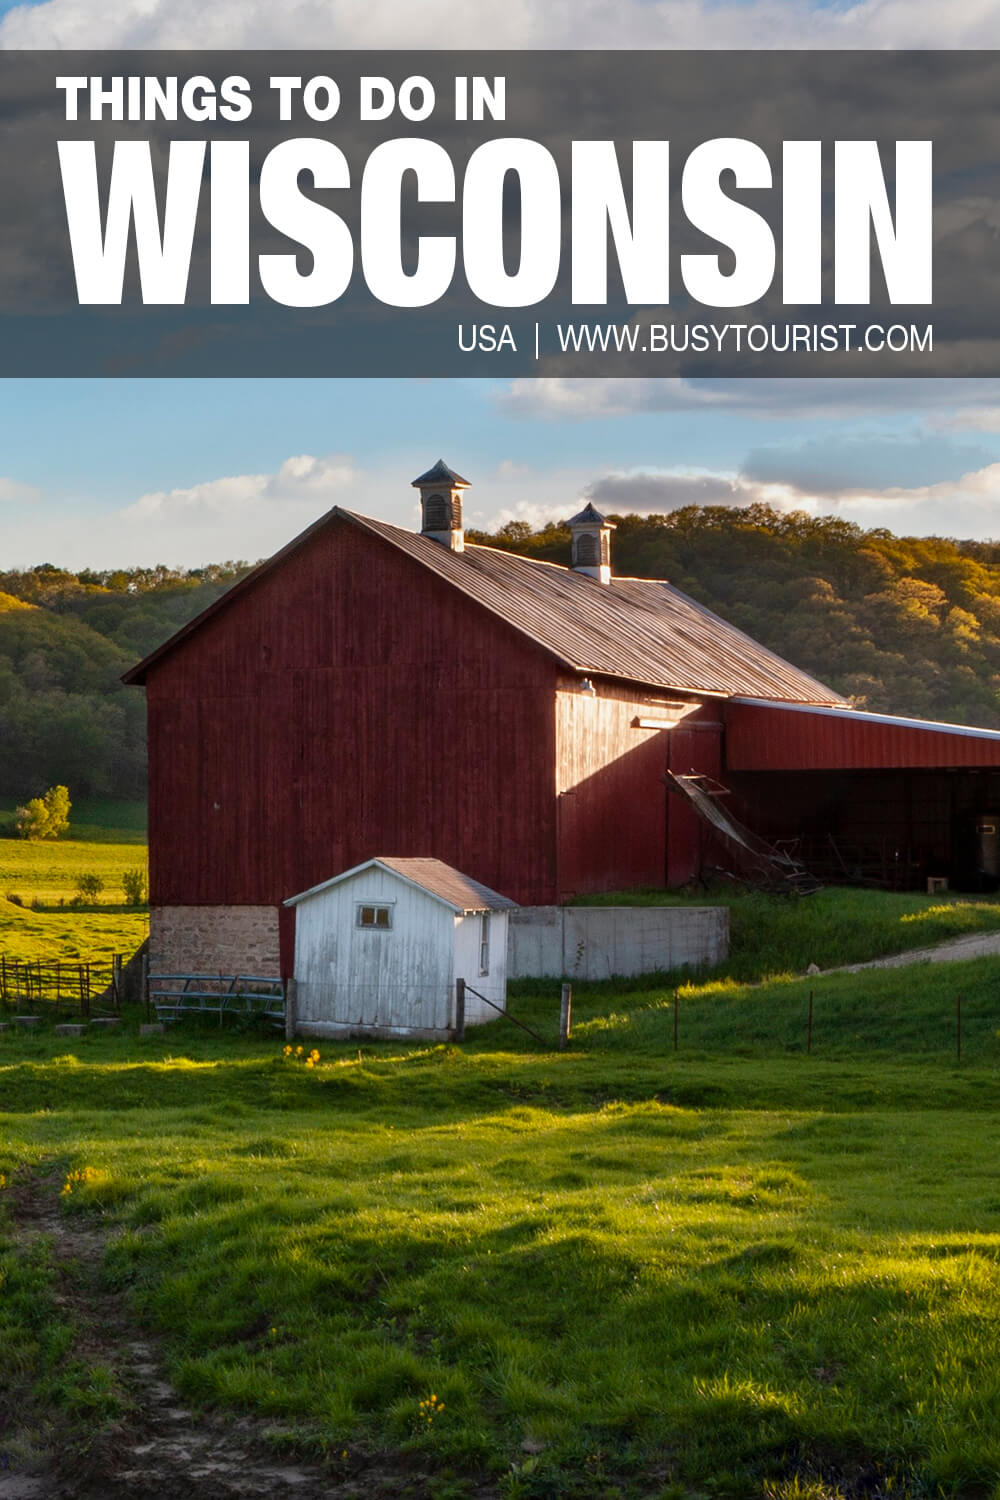 42 Things To Do & Places To Visit In Wisconsin Attractions & Activities